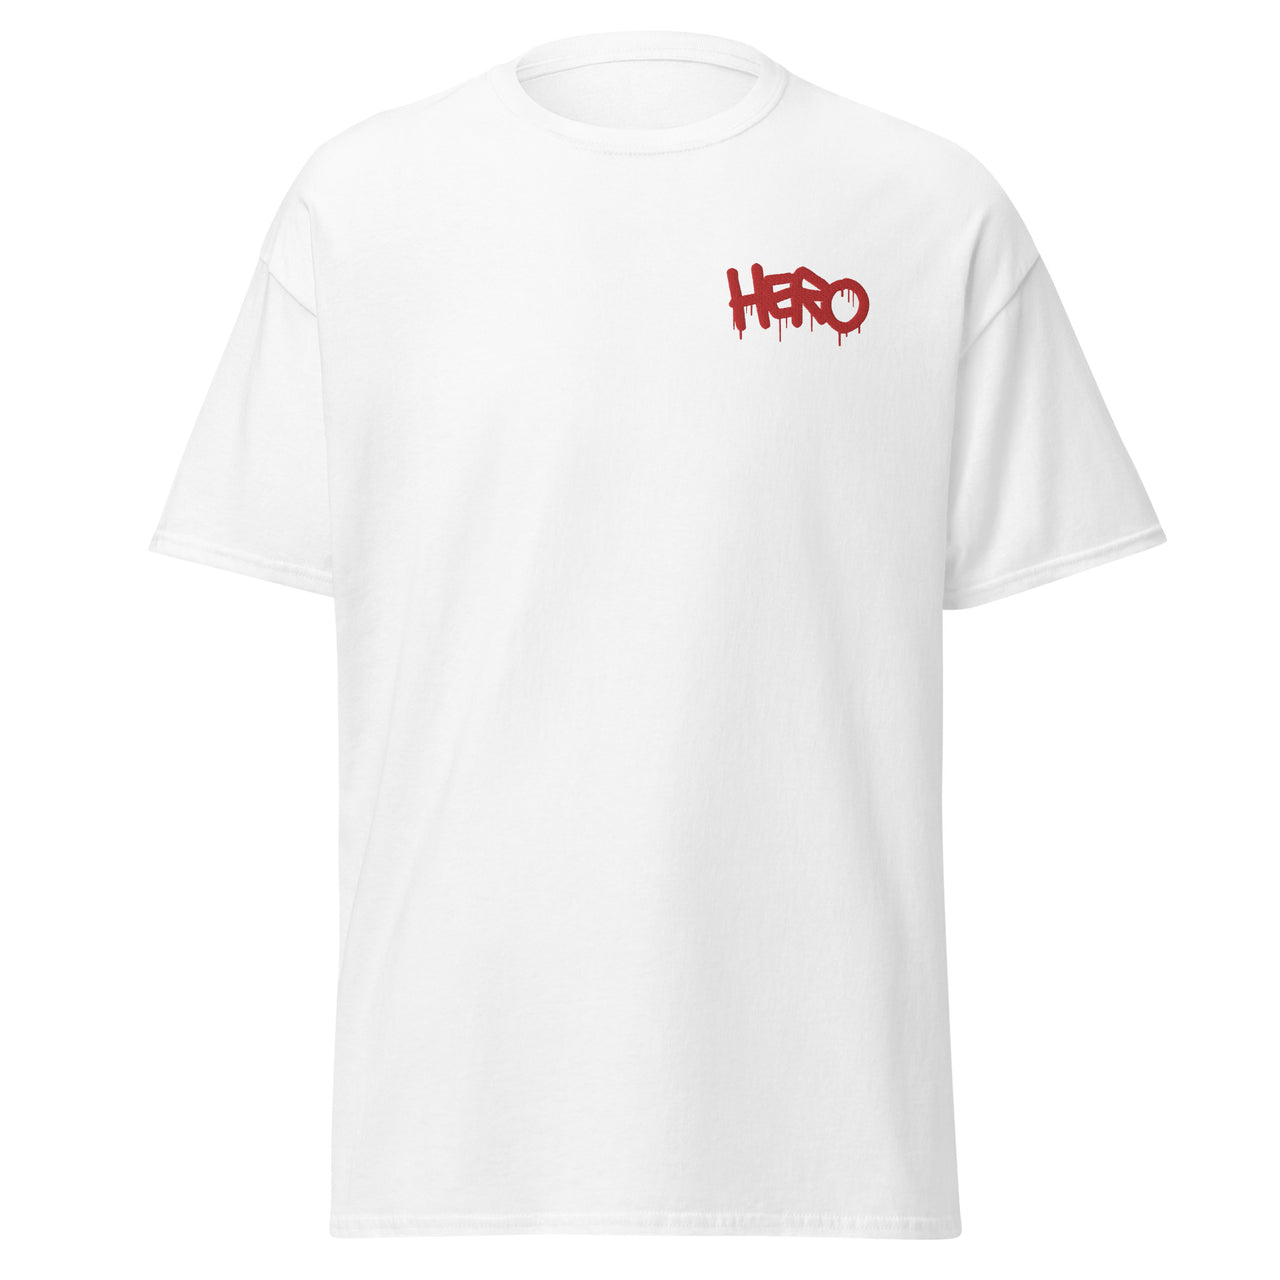 Unisex Hero  Classic Embroidery‘s Tee Shirt You Can't Live Without - Design Hero